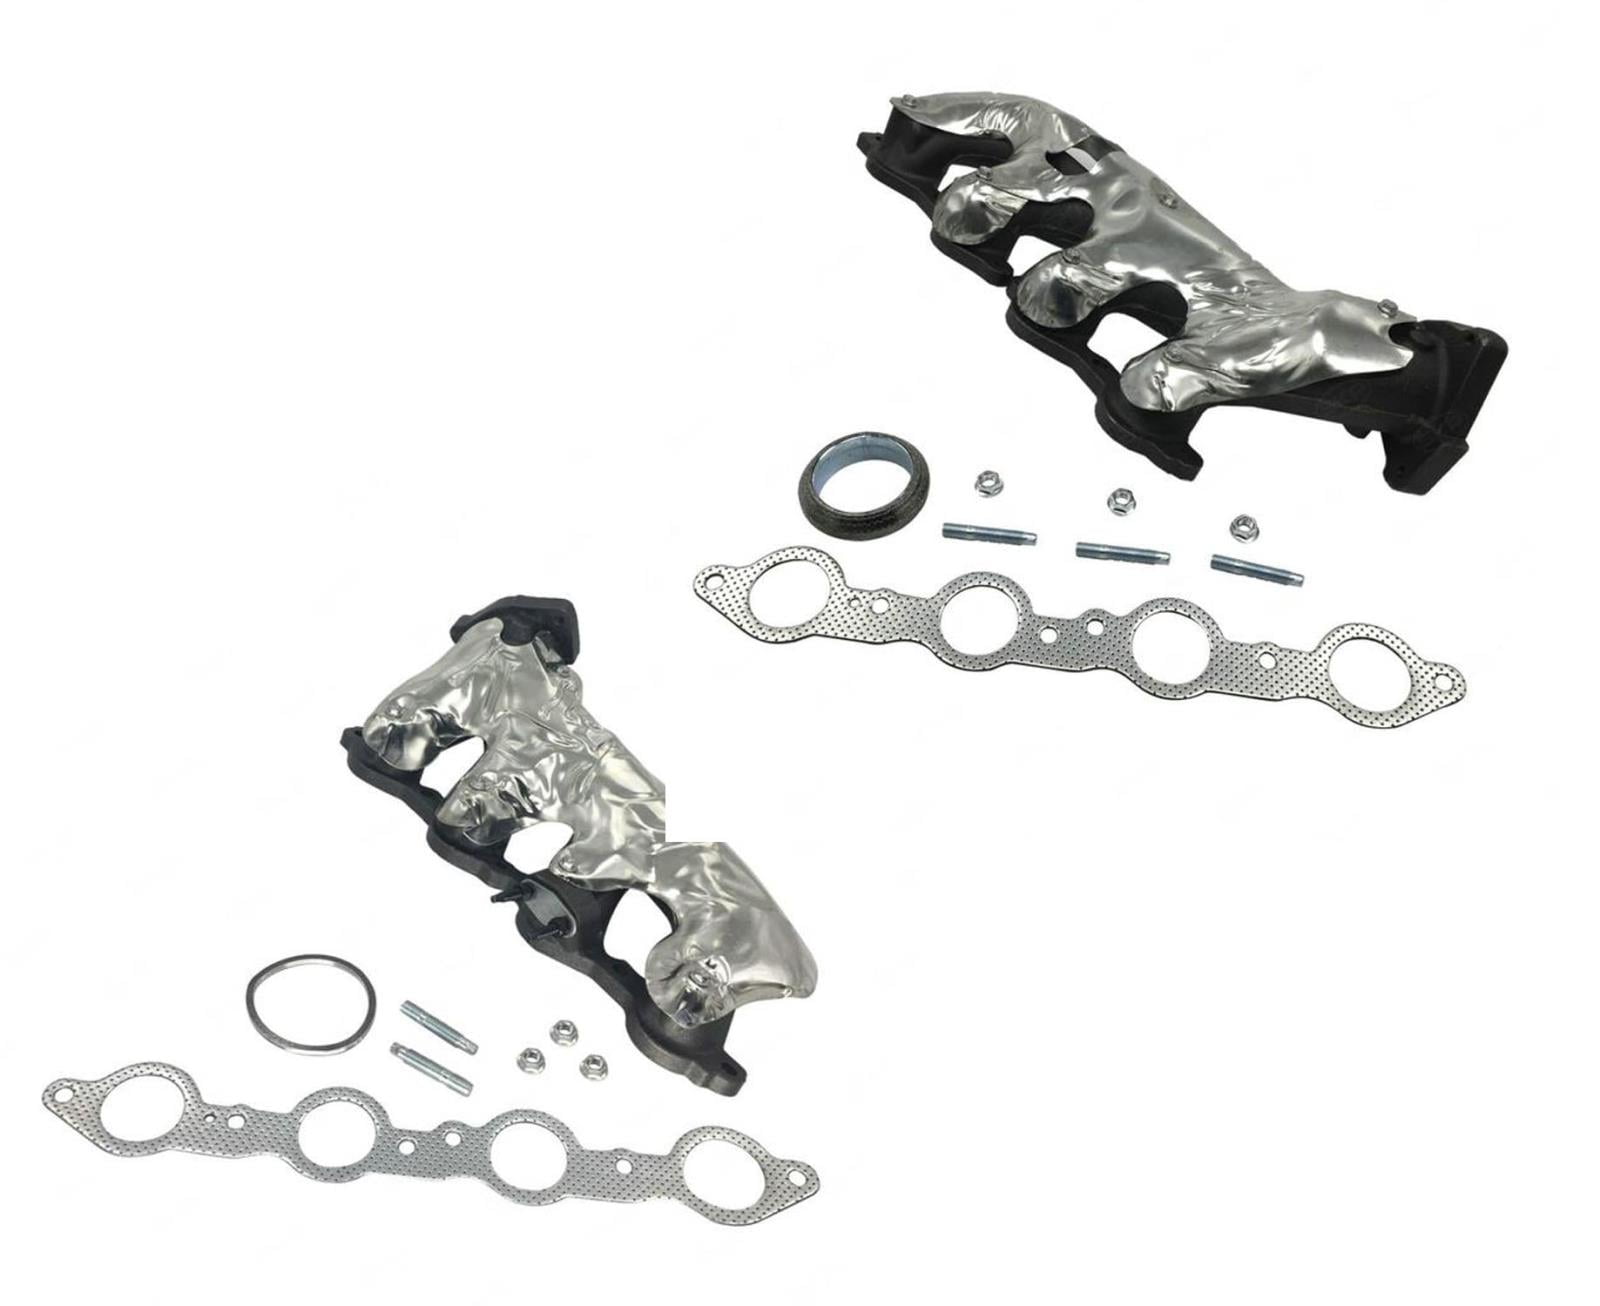 Right Passenger Side Exhaust Manifold with Gasket, Studs, and Nuts  Compatible with 2011 2015, 2017 2019 Ford F-250 Super Duty 6.2L V8 2012  2013 2014 2018